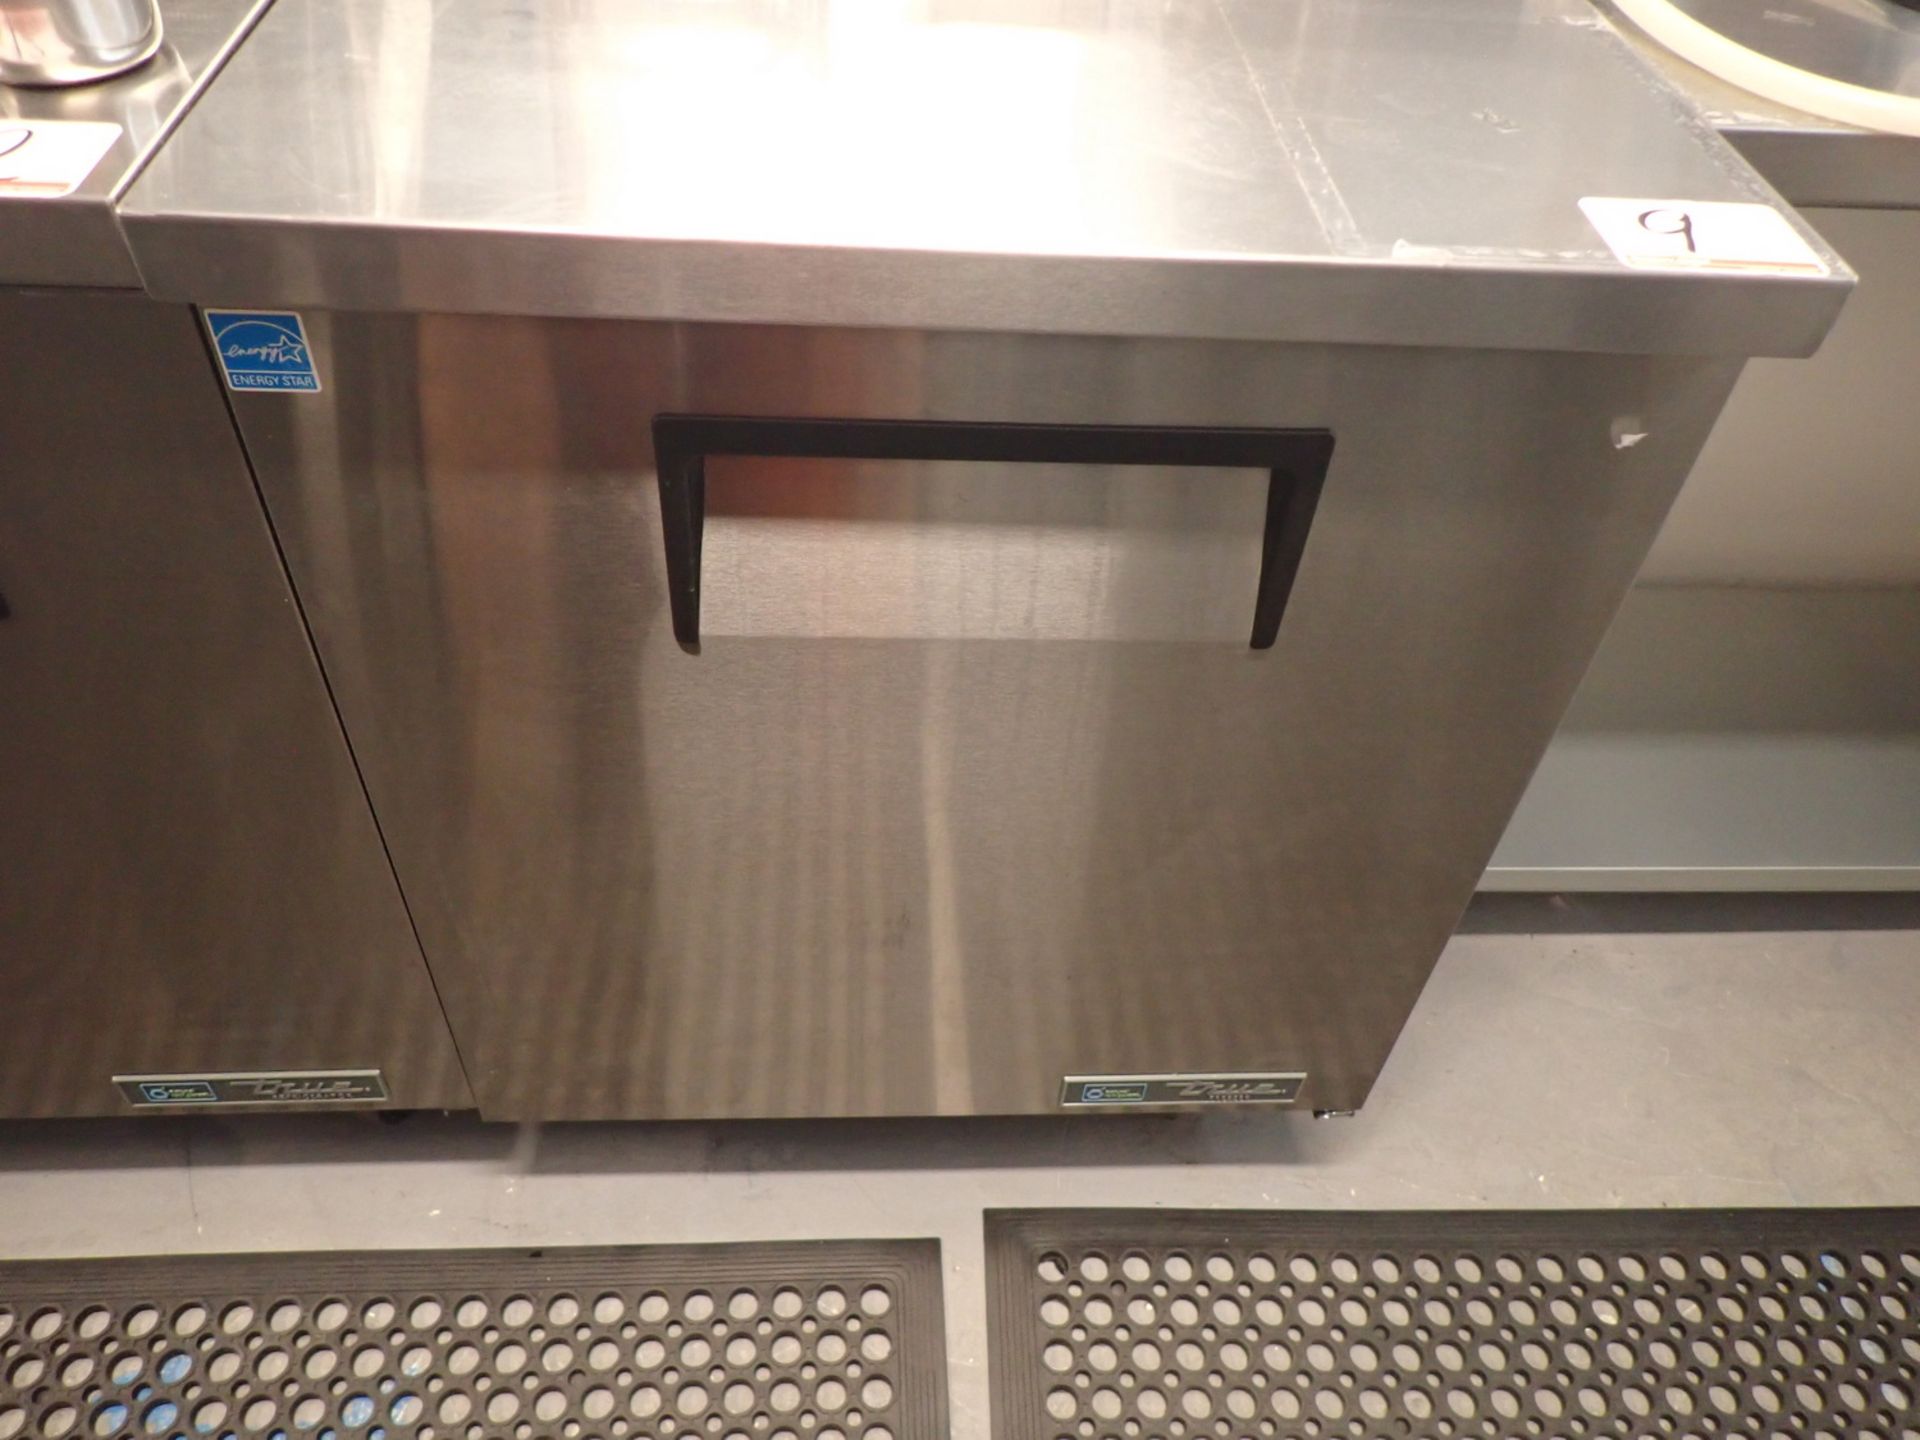 TRUE TUC-27F-HC 27" 1-DOOR UNDERCOUNTER STAINLESS STEEL FREEZER (115V) W/ CASTERS - Image 2 of 4